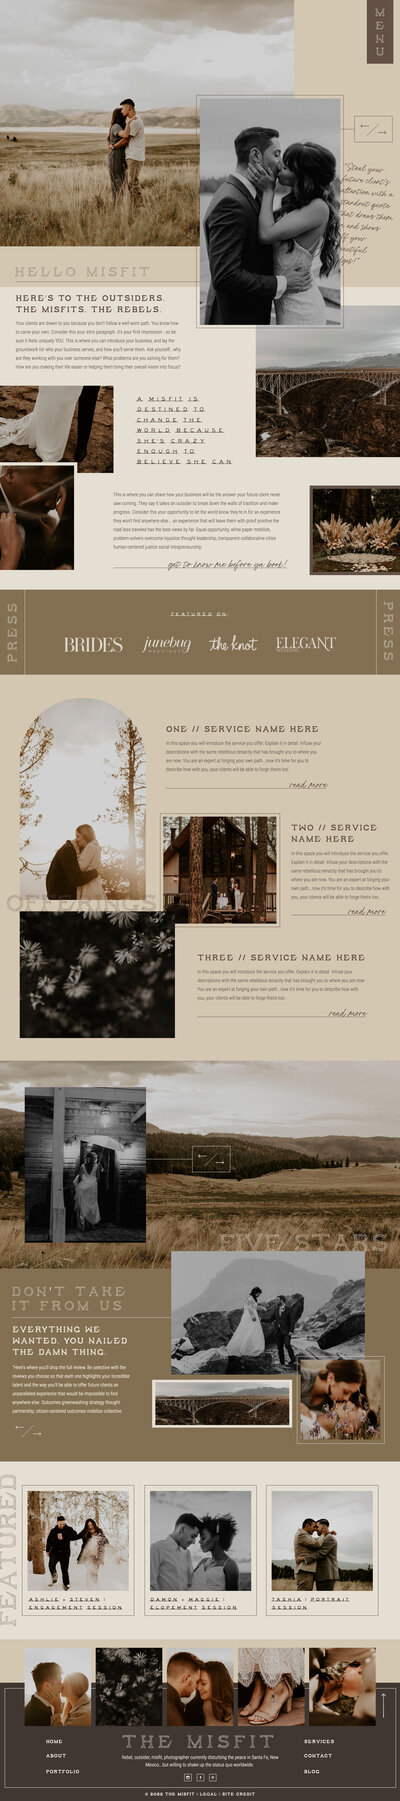 the misfit website in an earthy color palette